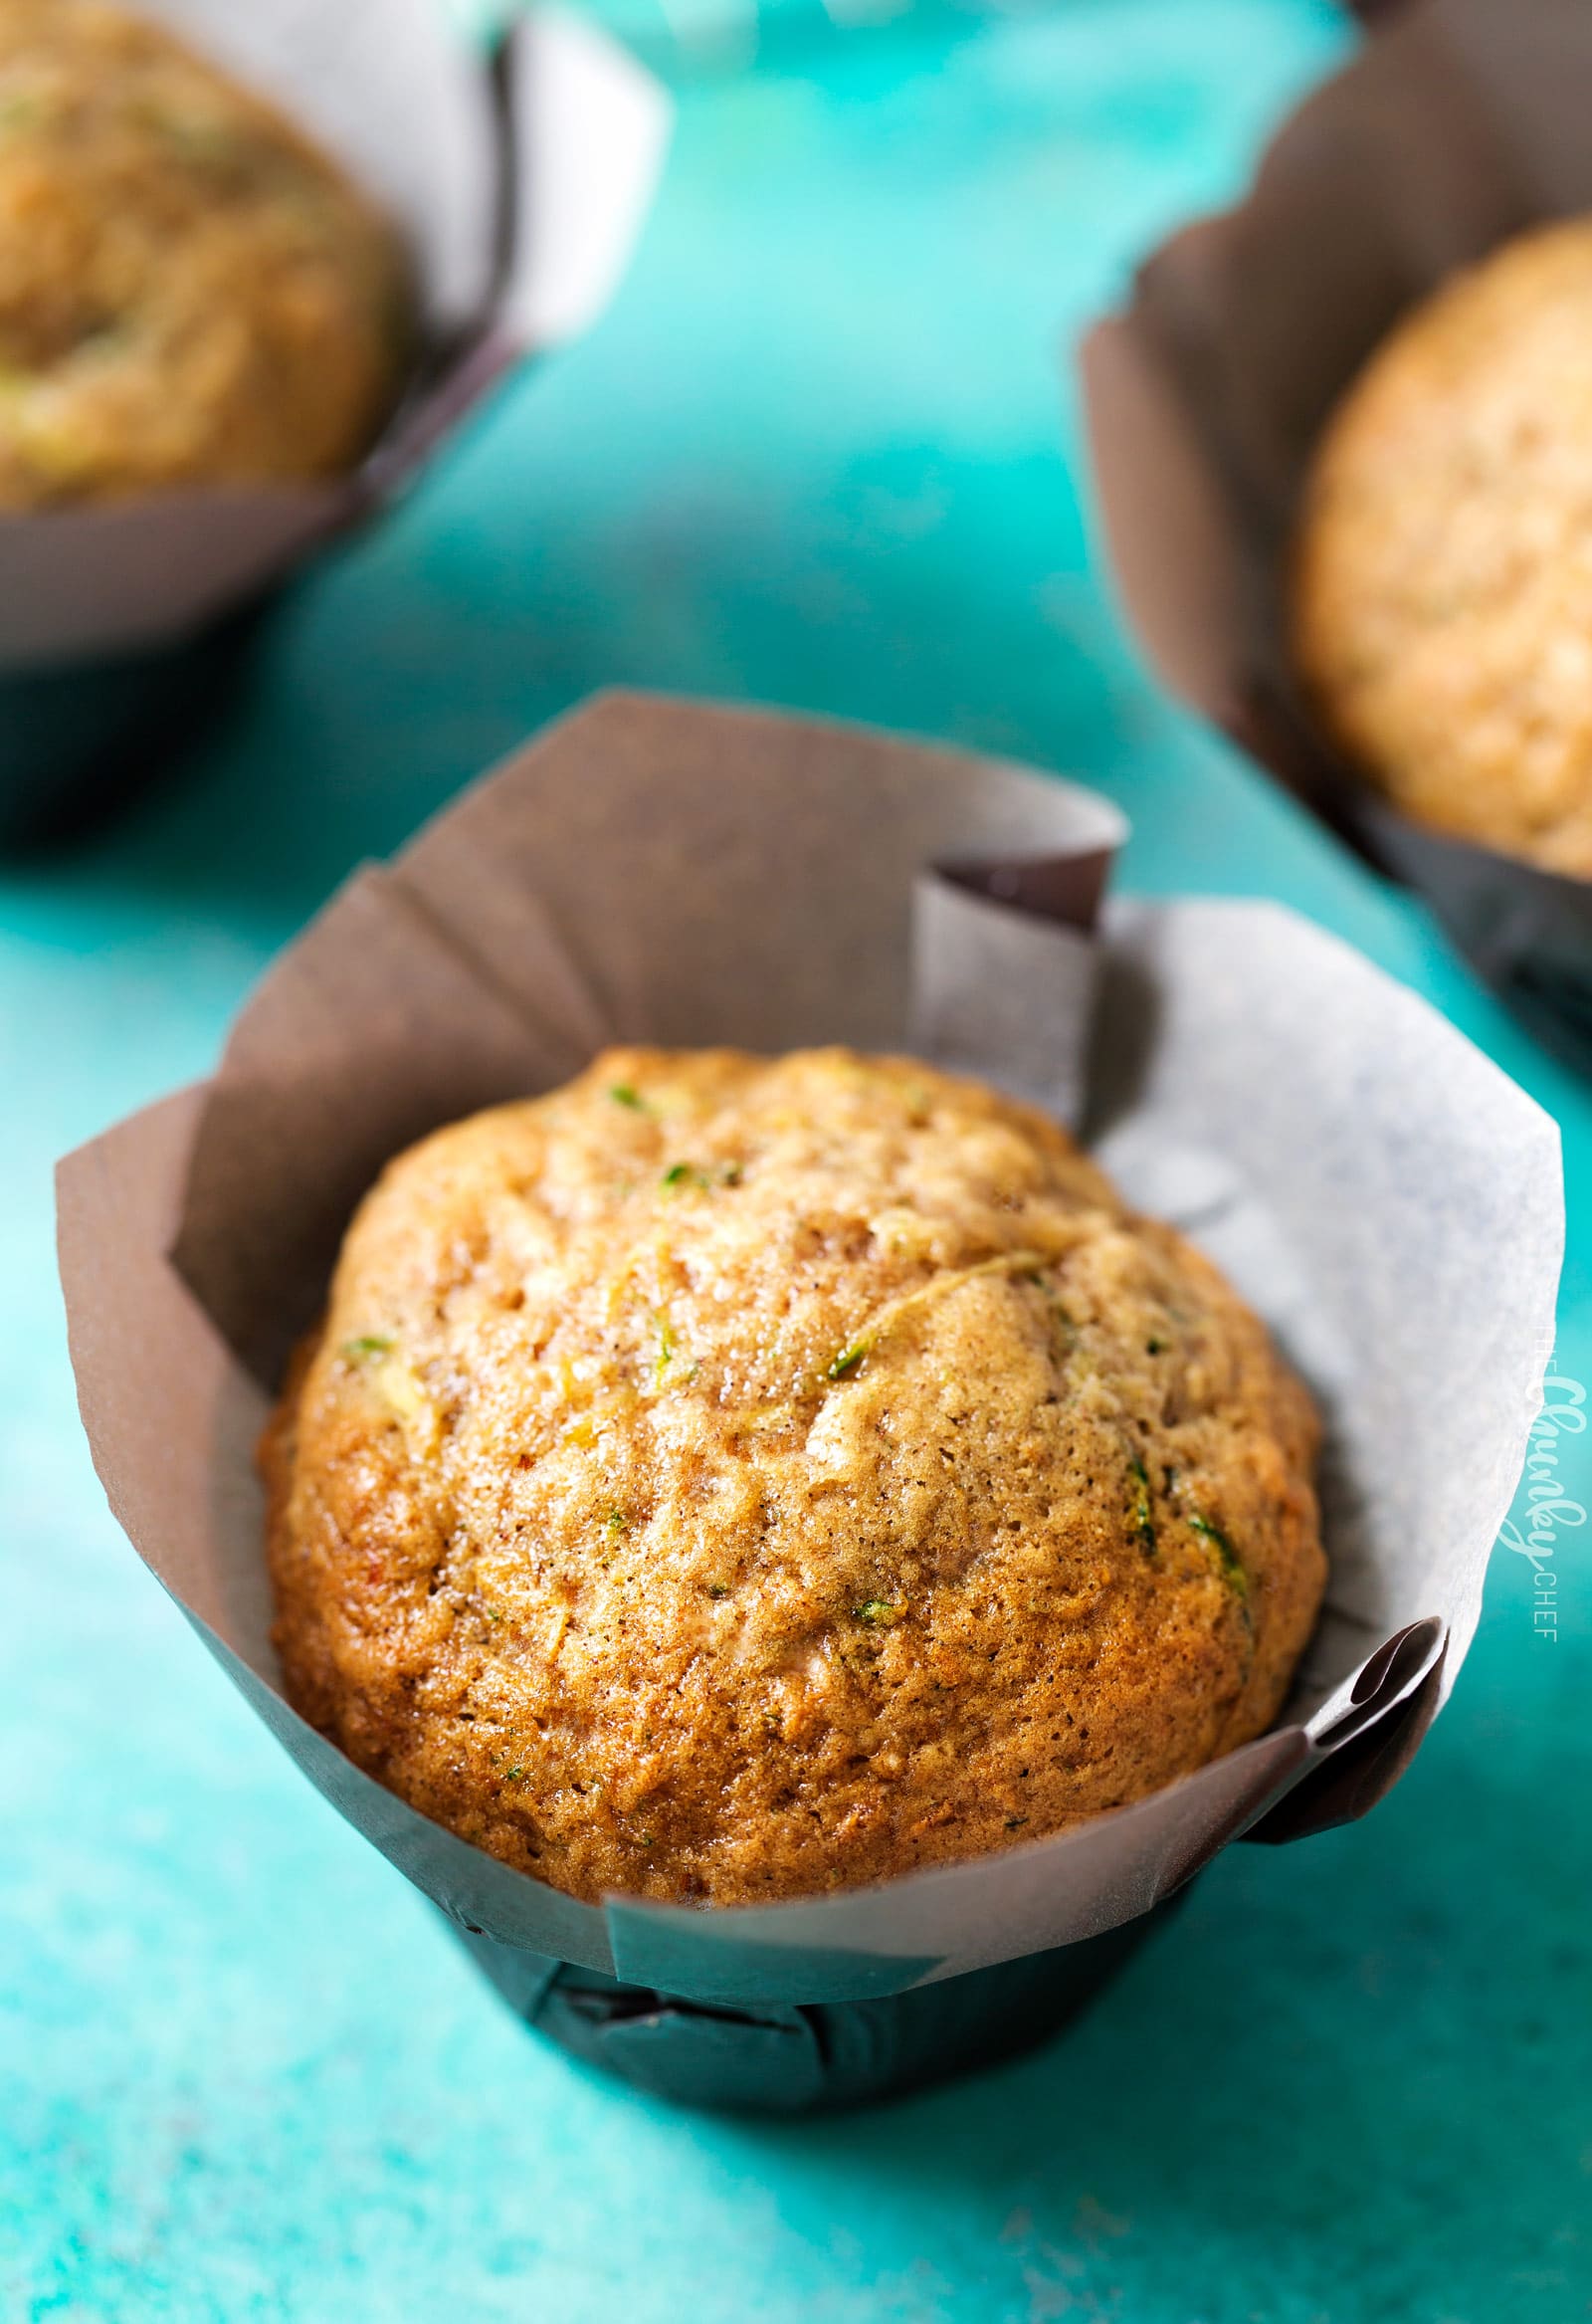 One Bowl Zucchini Muffins | One bowl, no mixer needed, and everyday ingredients... the perfect zucchini muffins! These muffins are perfect for breakfast, a snack, or getting kids to eat extra veggies! | http://thechunkychef.com